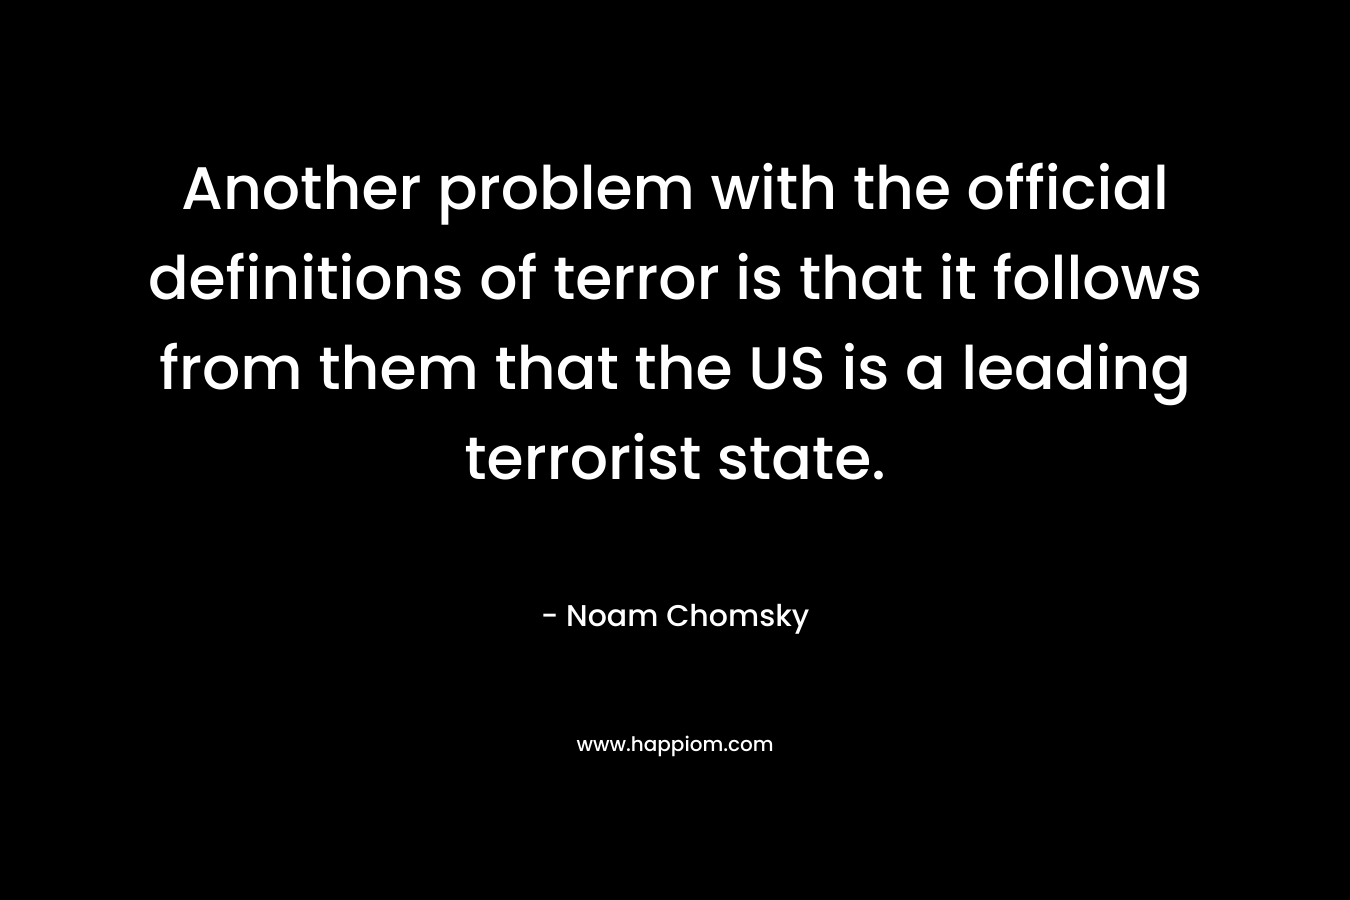 Another problem with the official definitions of terror is that it follows from them that the US is a leading terrorist state. – Noam Chomsky